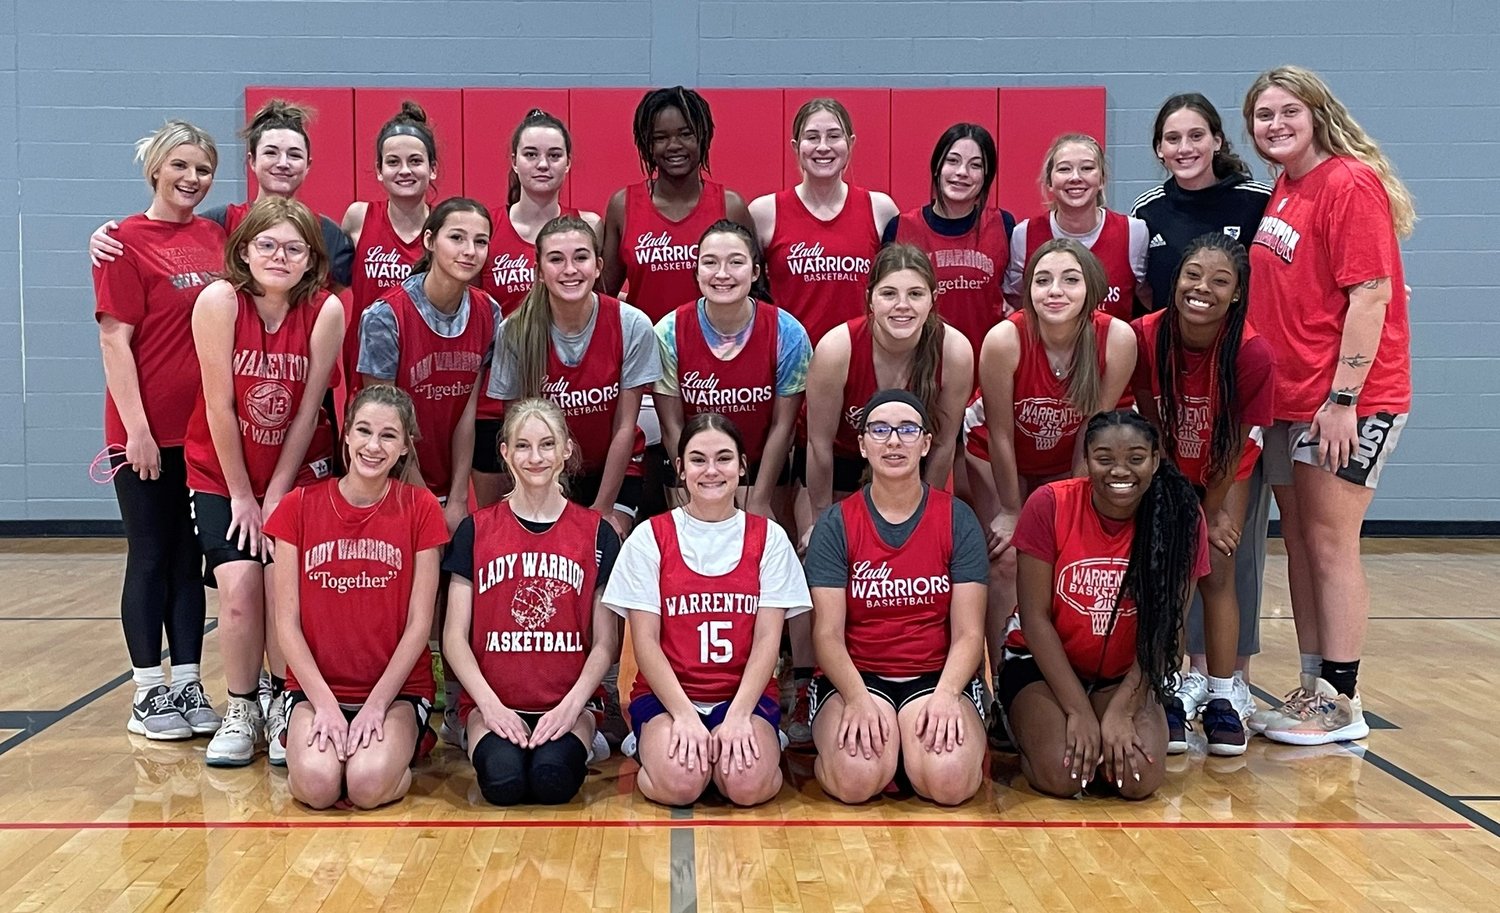 Members of the Warrenton girls basketball team are, front row, from left:  Makenna Faubion, Natalie Scheibe, Gabrielle Devivo, Rose Renshaw, Mi’cheall Thomas. Middle row, from left: Kimberly Huellewig, Alyssa Adams, Isabel Benke, Kylie Overkamp, Erin Klasing, Abbigail Nehring, Nyasia Love. Back row, from left: Head coach Hannah Logan, Audrey Payne, Kendall Taylor, Zoe Klaus, Nevaeh Hill, Kaelyn Meyer, Zoe Duncan, Anna Wade, Assistant coach Brooke Smith, Assistant coach Kayla Nelson. Not pictured: Sophi Mueller, Savannah Miller, Emma Ducan, Aniyah Hoper.